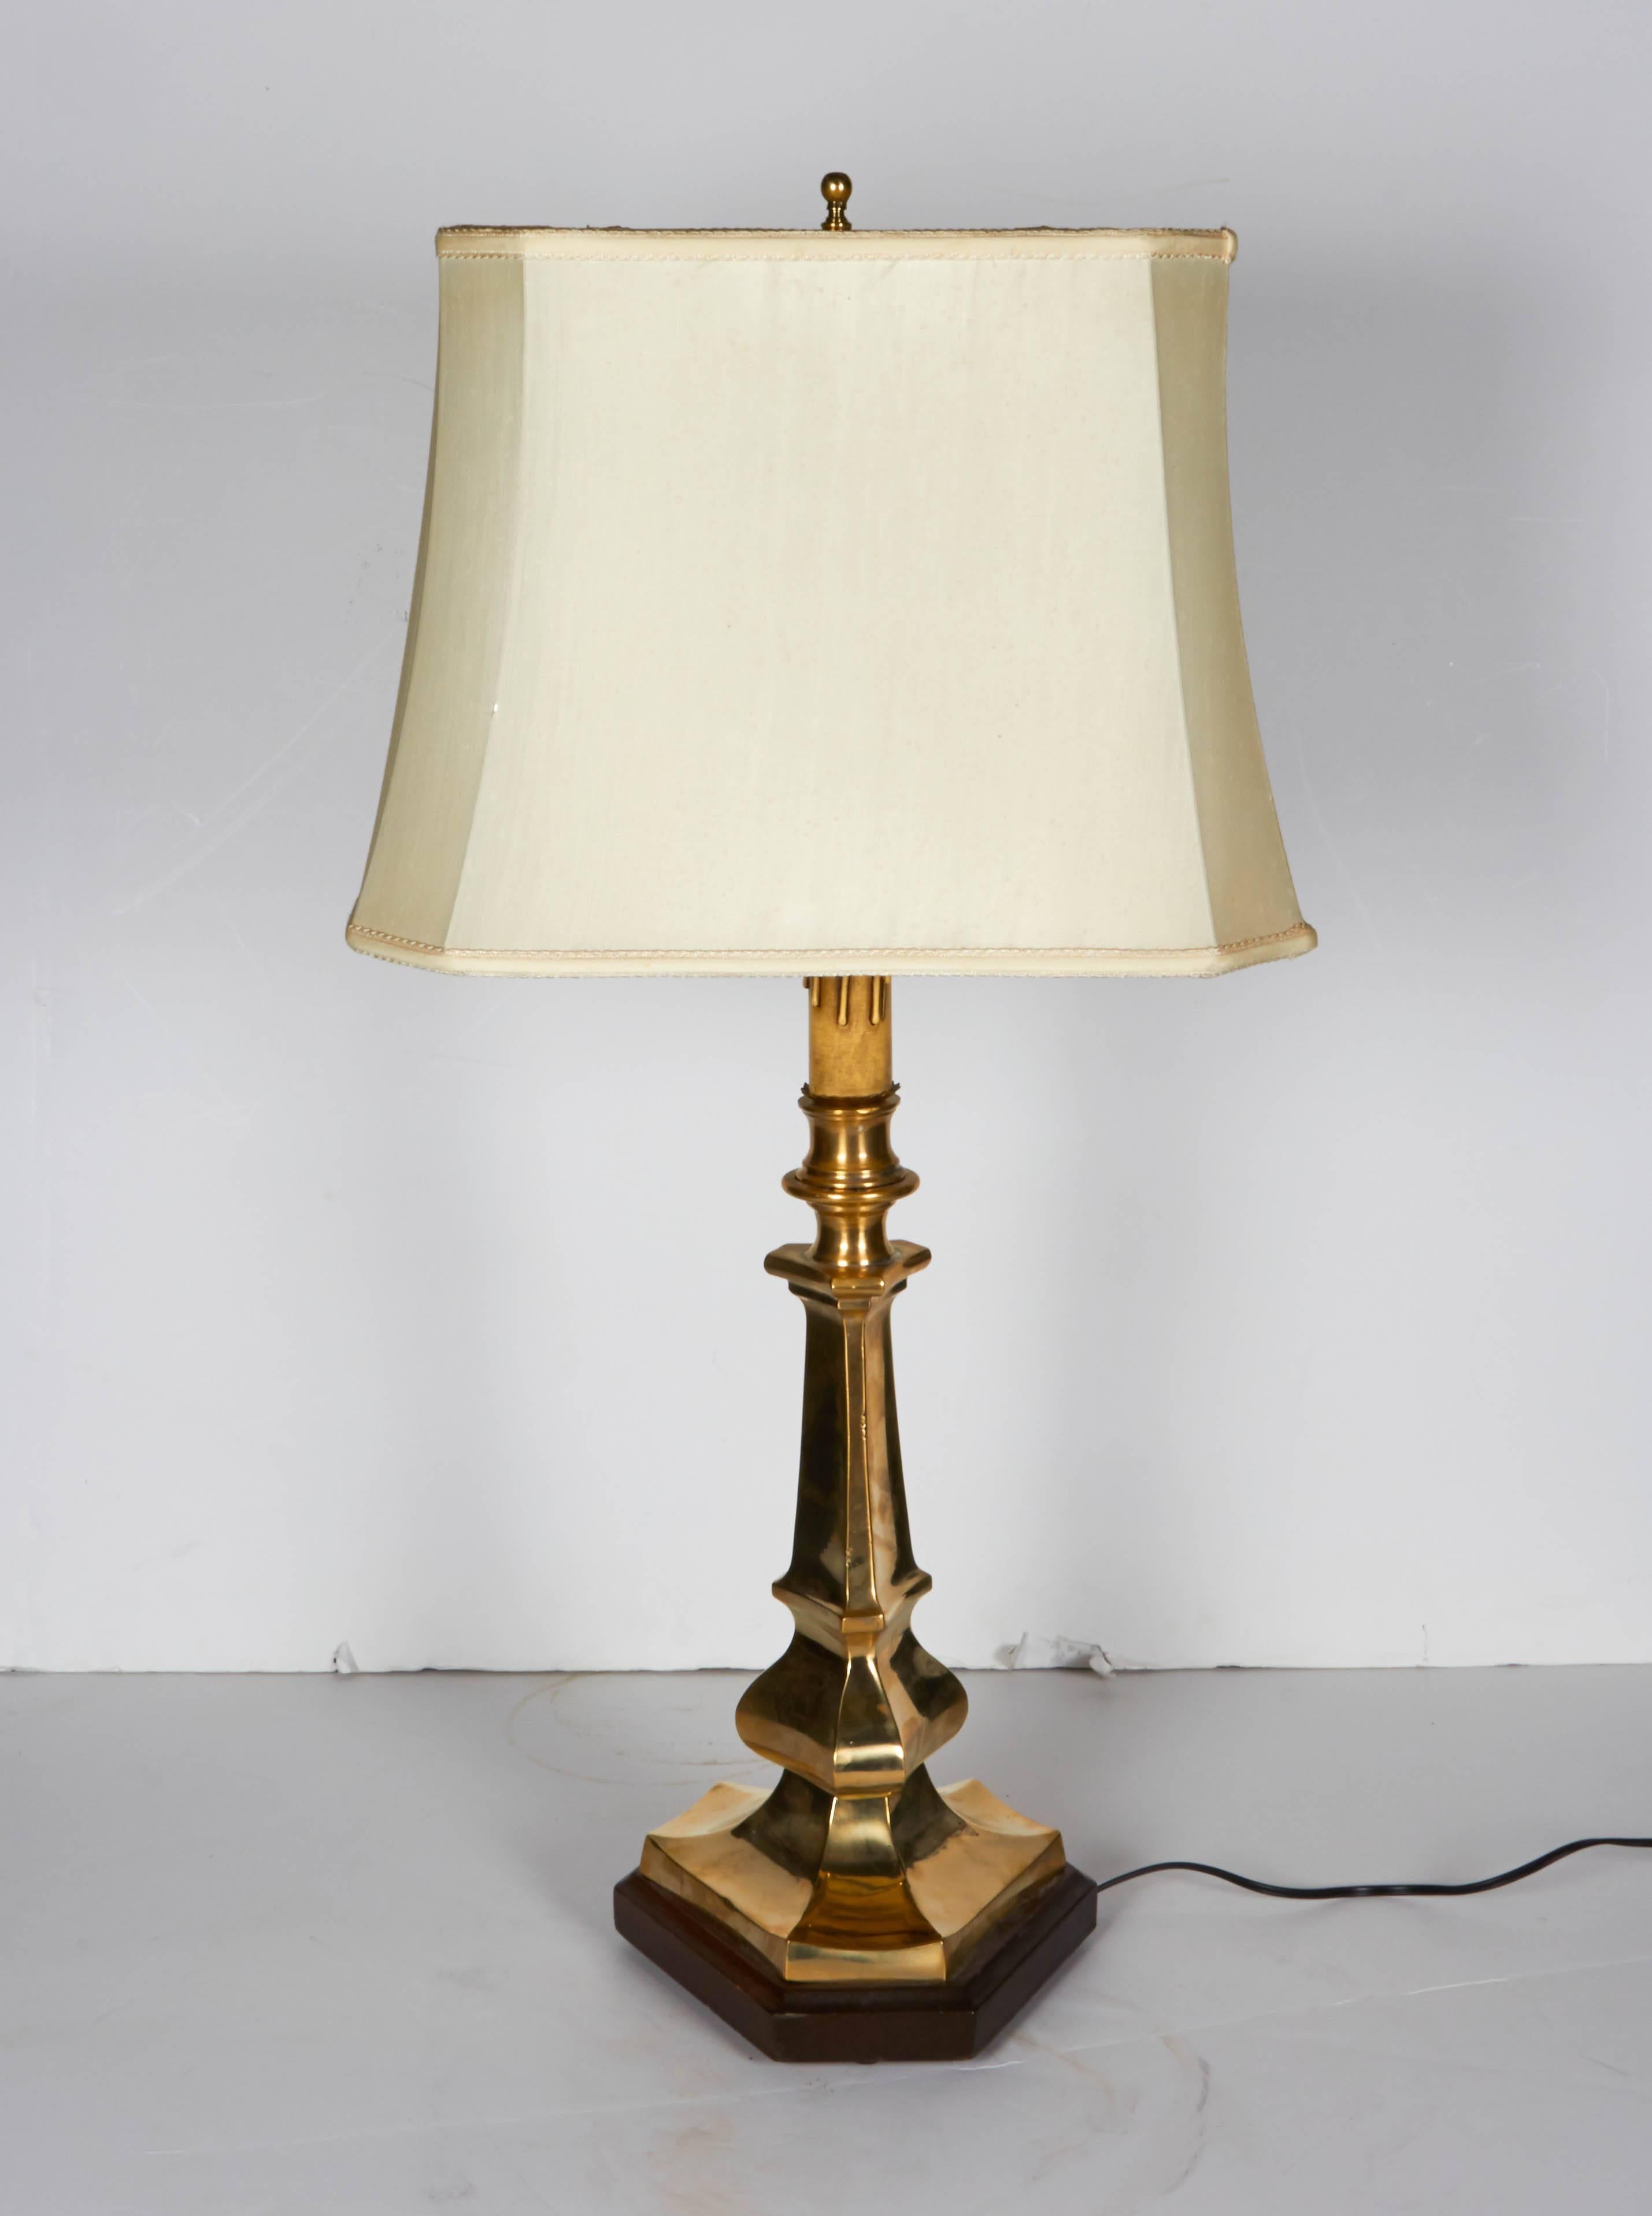 Classical Regency style Italian candlestick table lamp. Cast in solid brass with a triangular design and resting on a wood base. Nice heavy weight. Measures: Base is 9.5